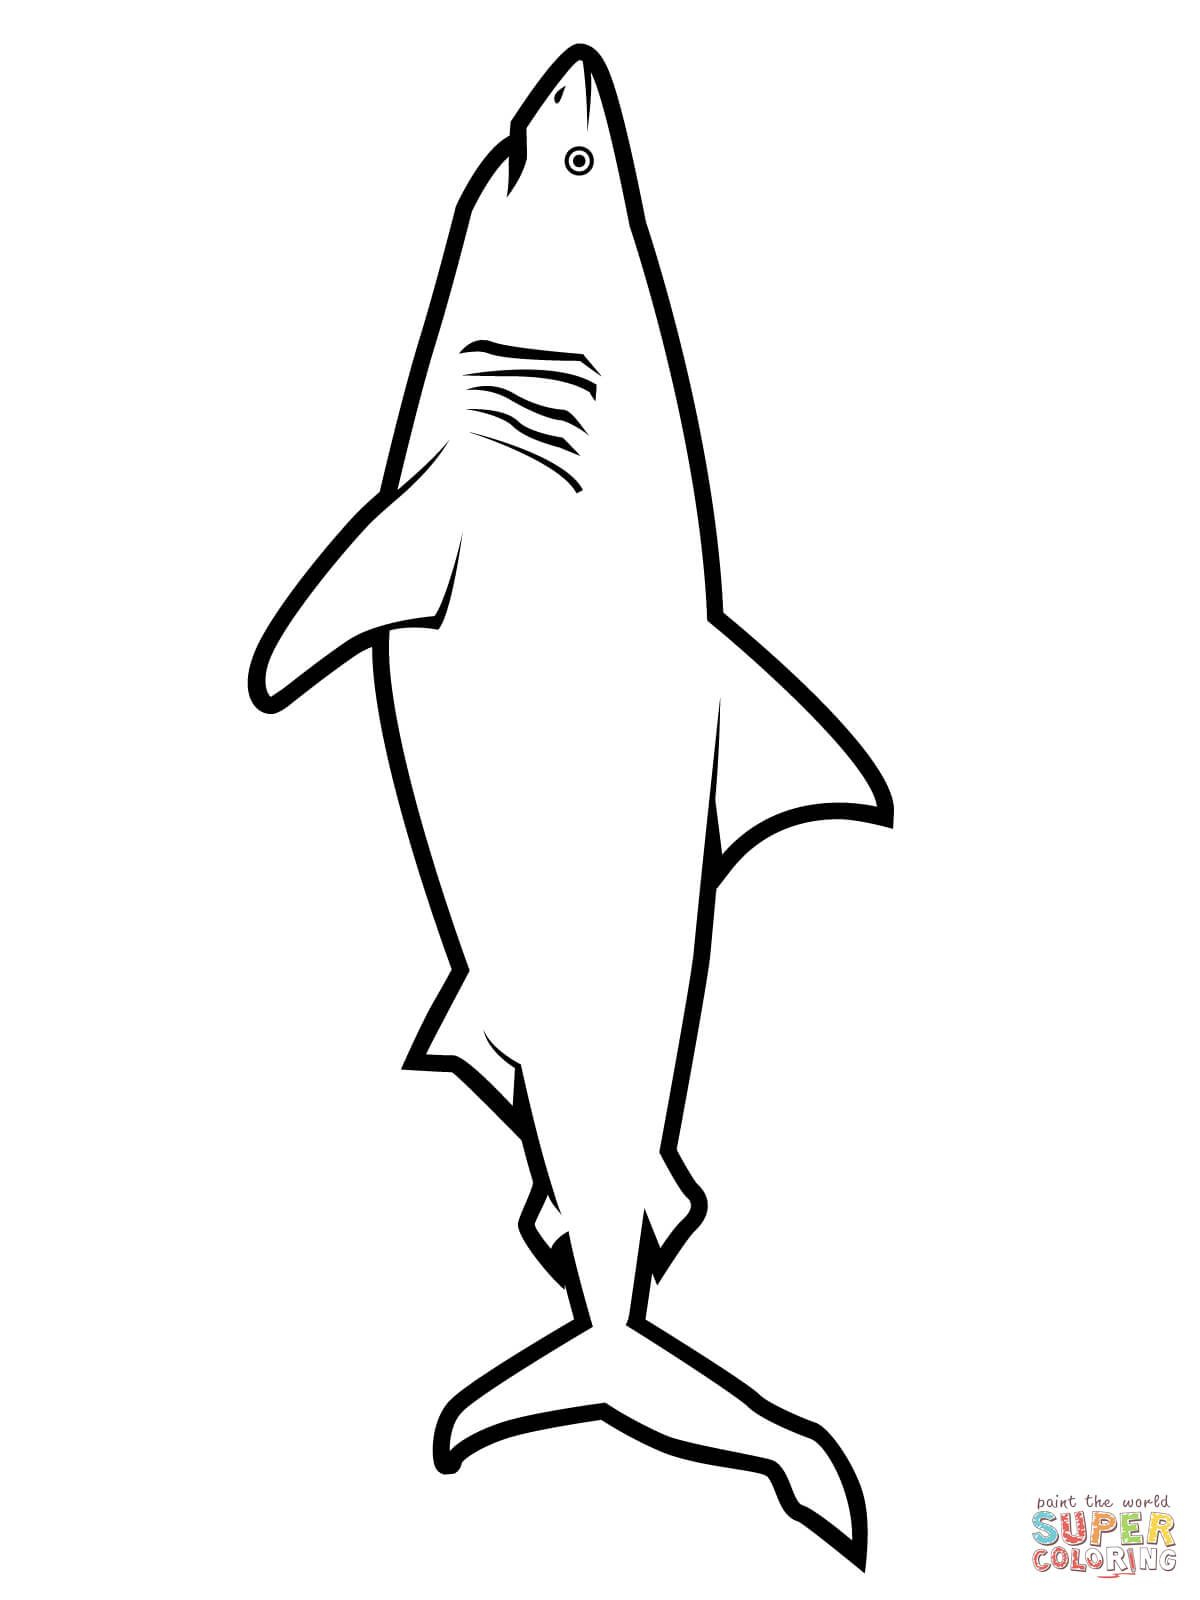 Realistic Great White Shark Coloring Page | Free Printable Coloring - Free Printable Great White Shark Coloring Pages